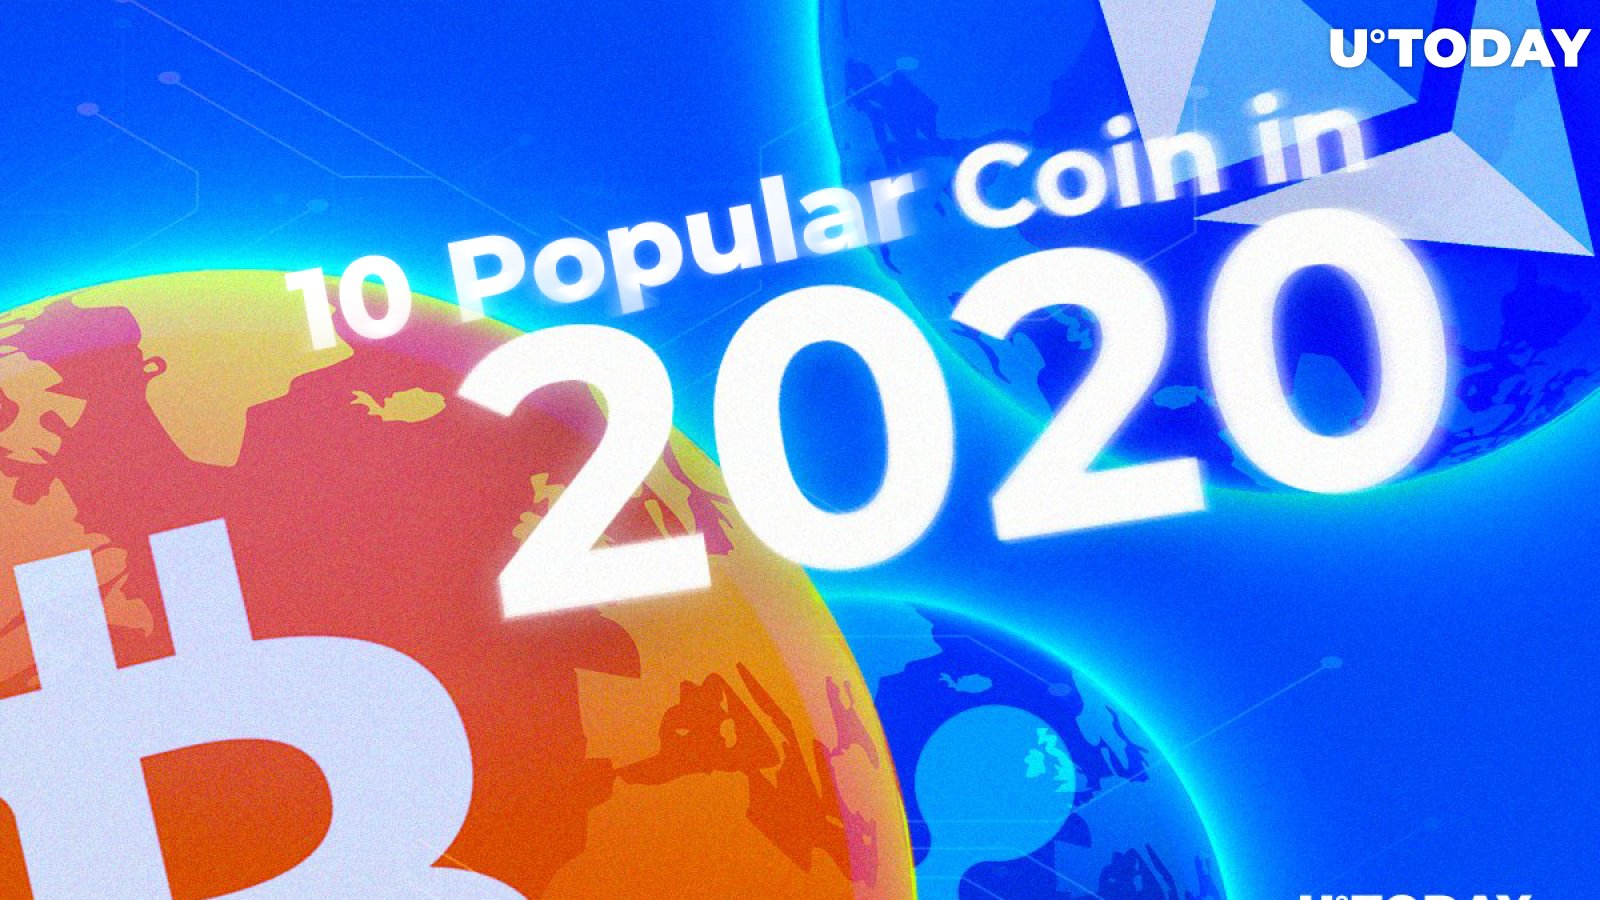 10 Popular Coins in 2020 Forecast: How Much Might the Big Cryptocurrency Cost?